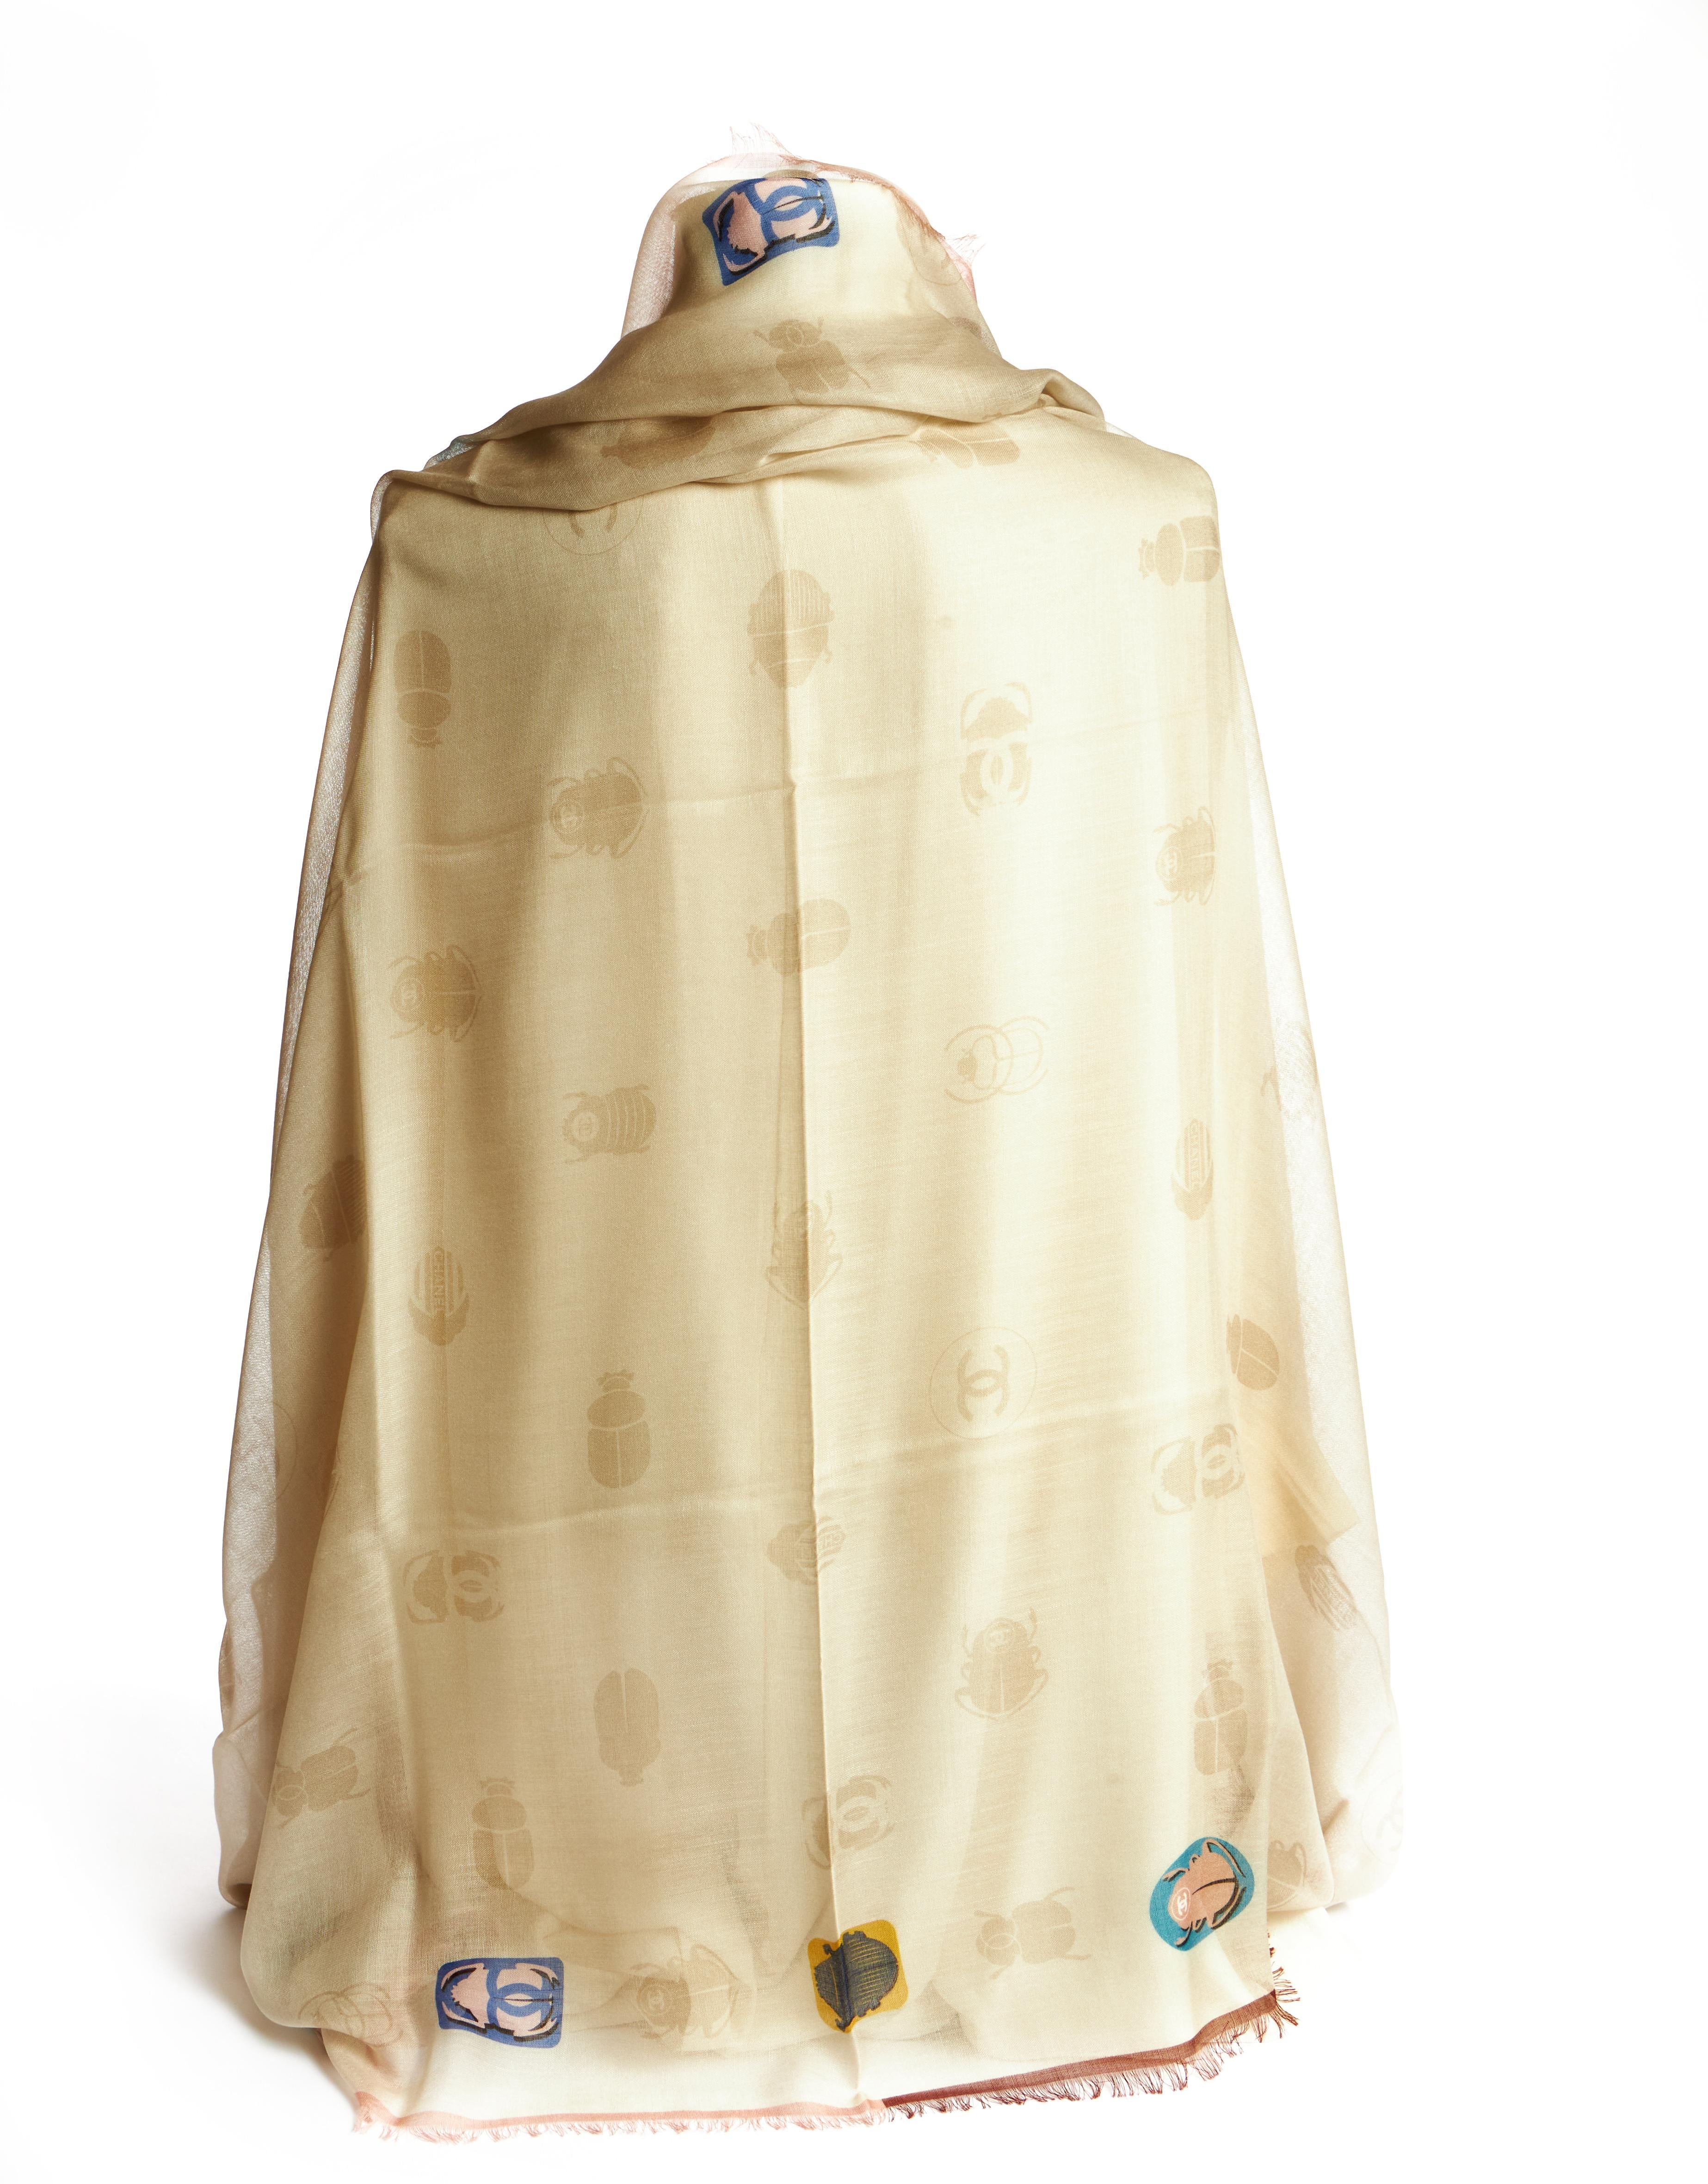 Chanel brand new large shawl in cream with beetle logo design. 80% cashmere, 20% silk. Comes with original care tag.